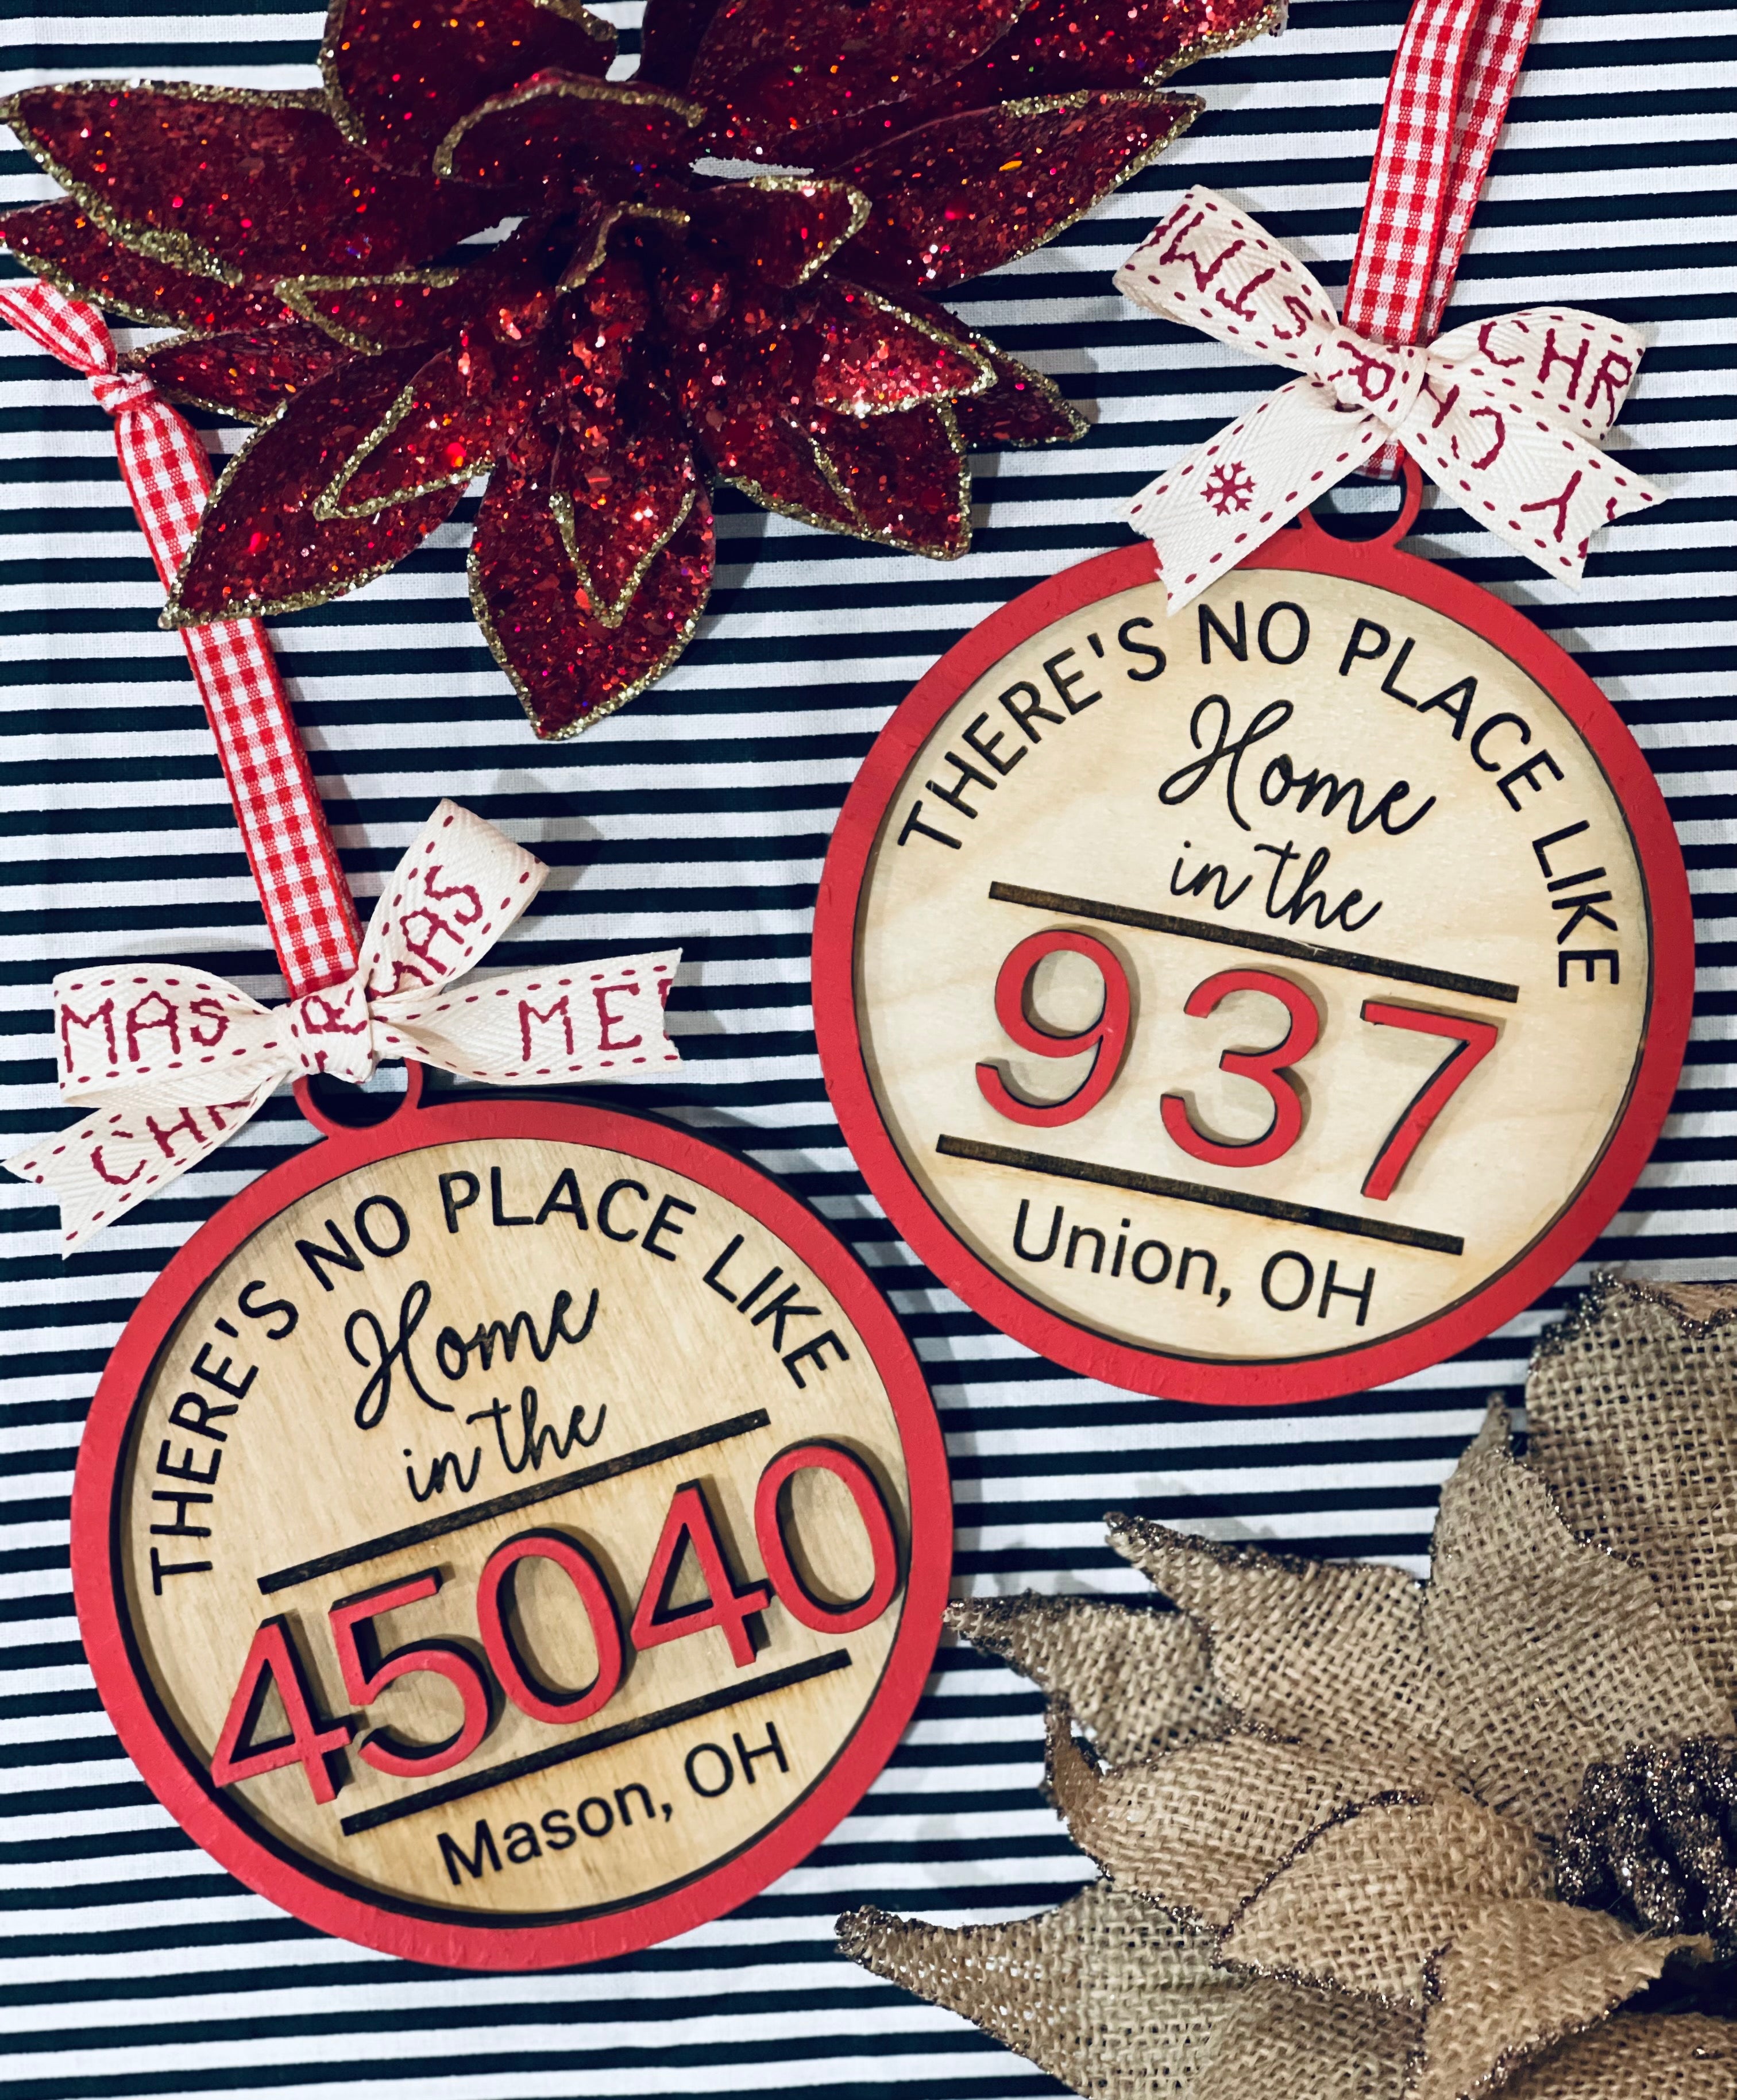 Tbis image shows tbe teo small zip code and area code ornaments. 